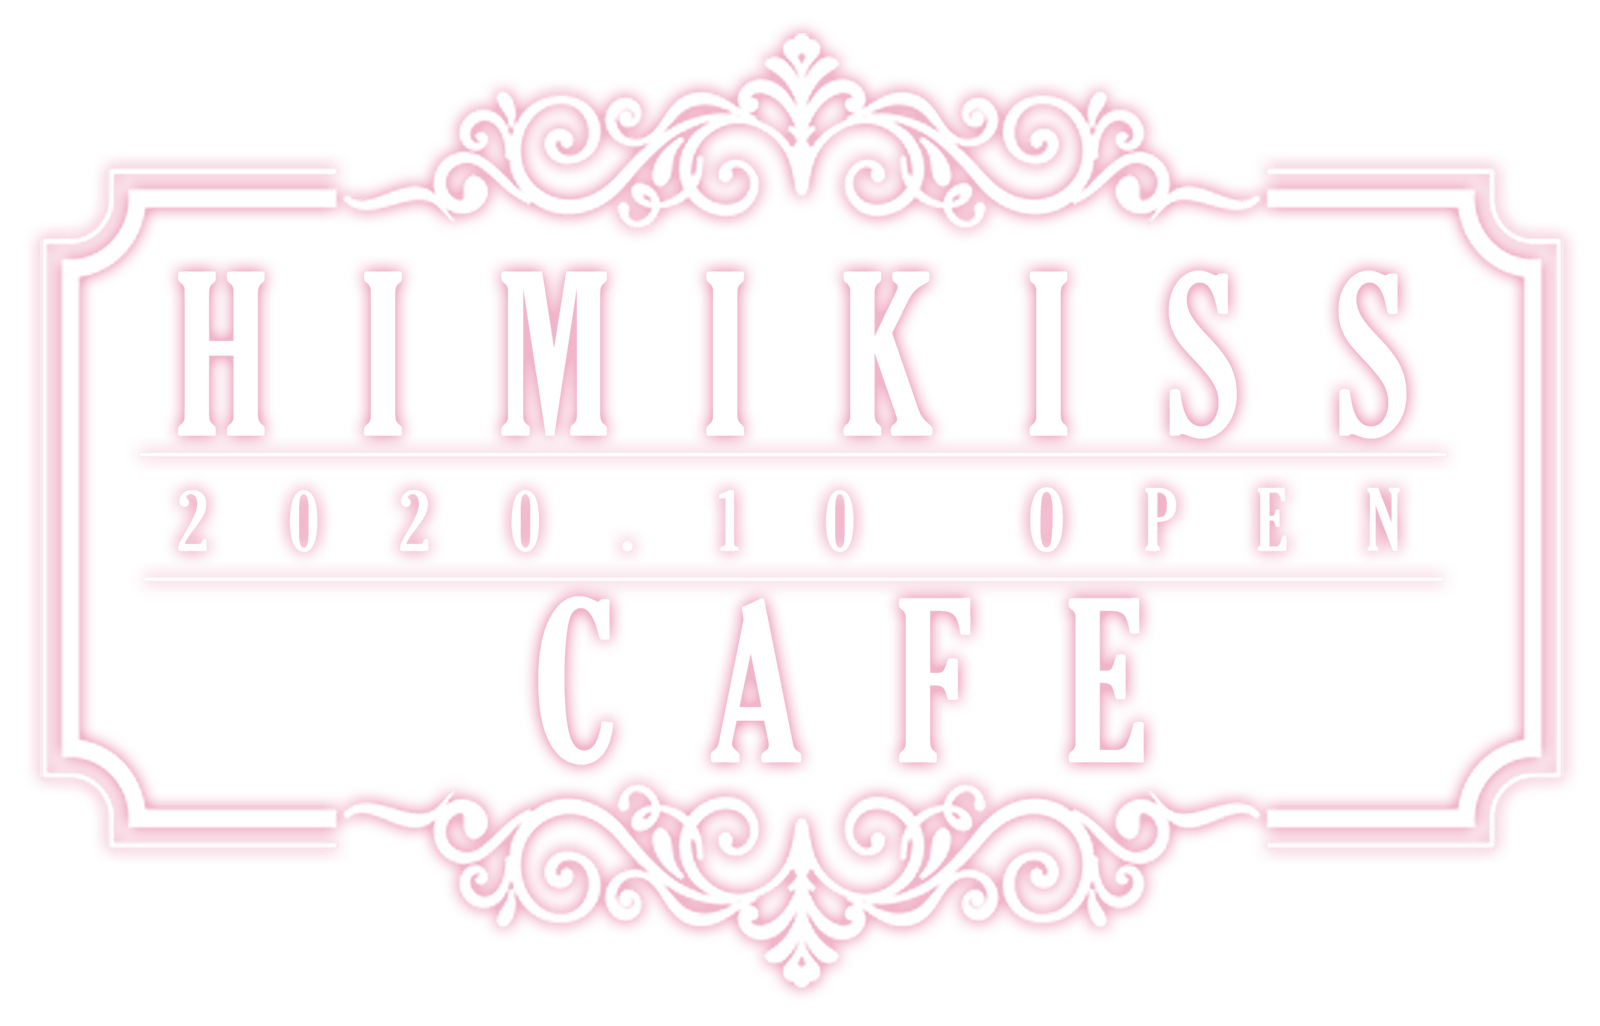 HIMIKISS CAFE